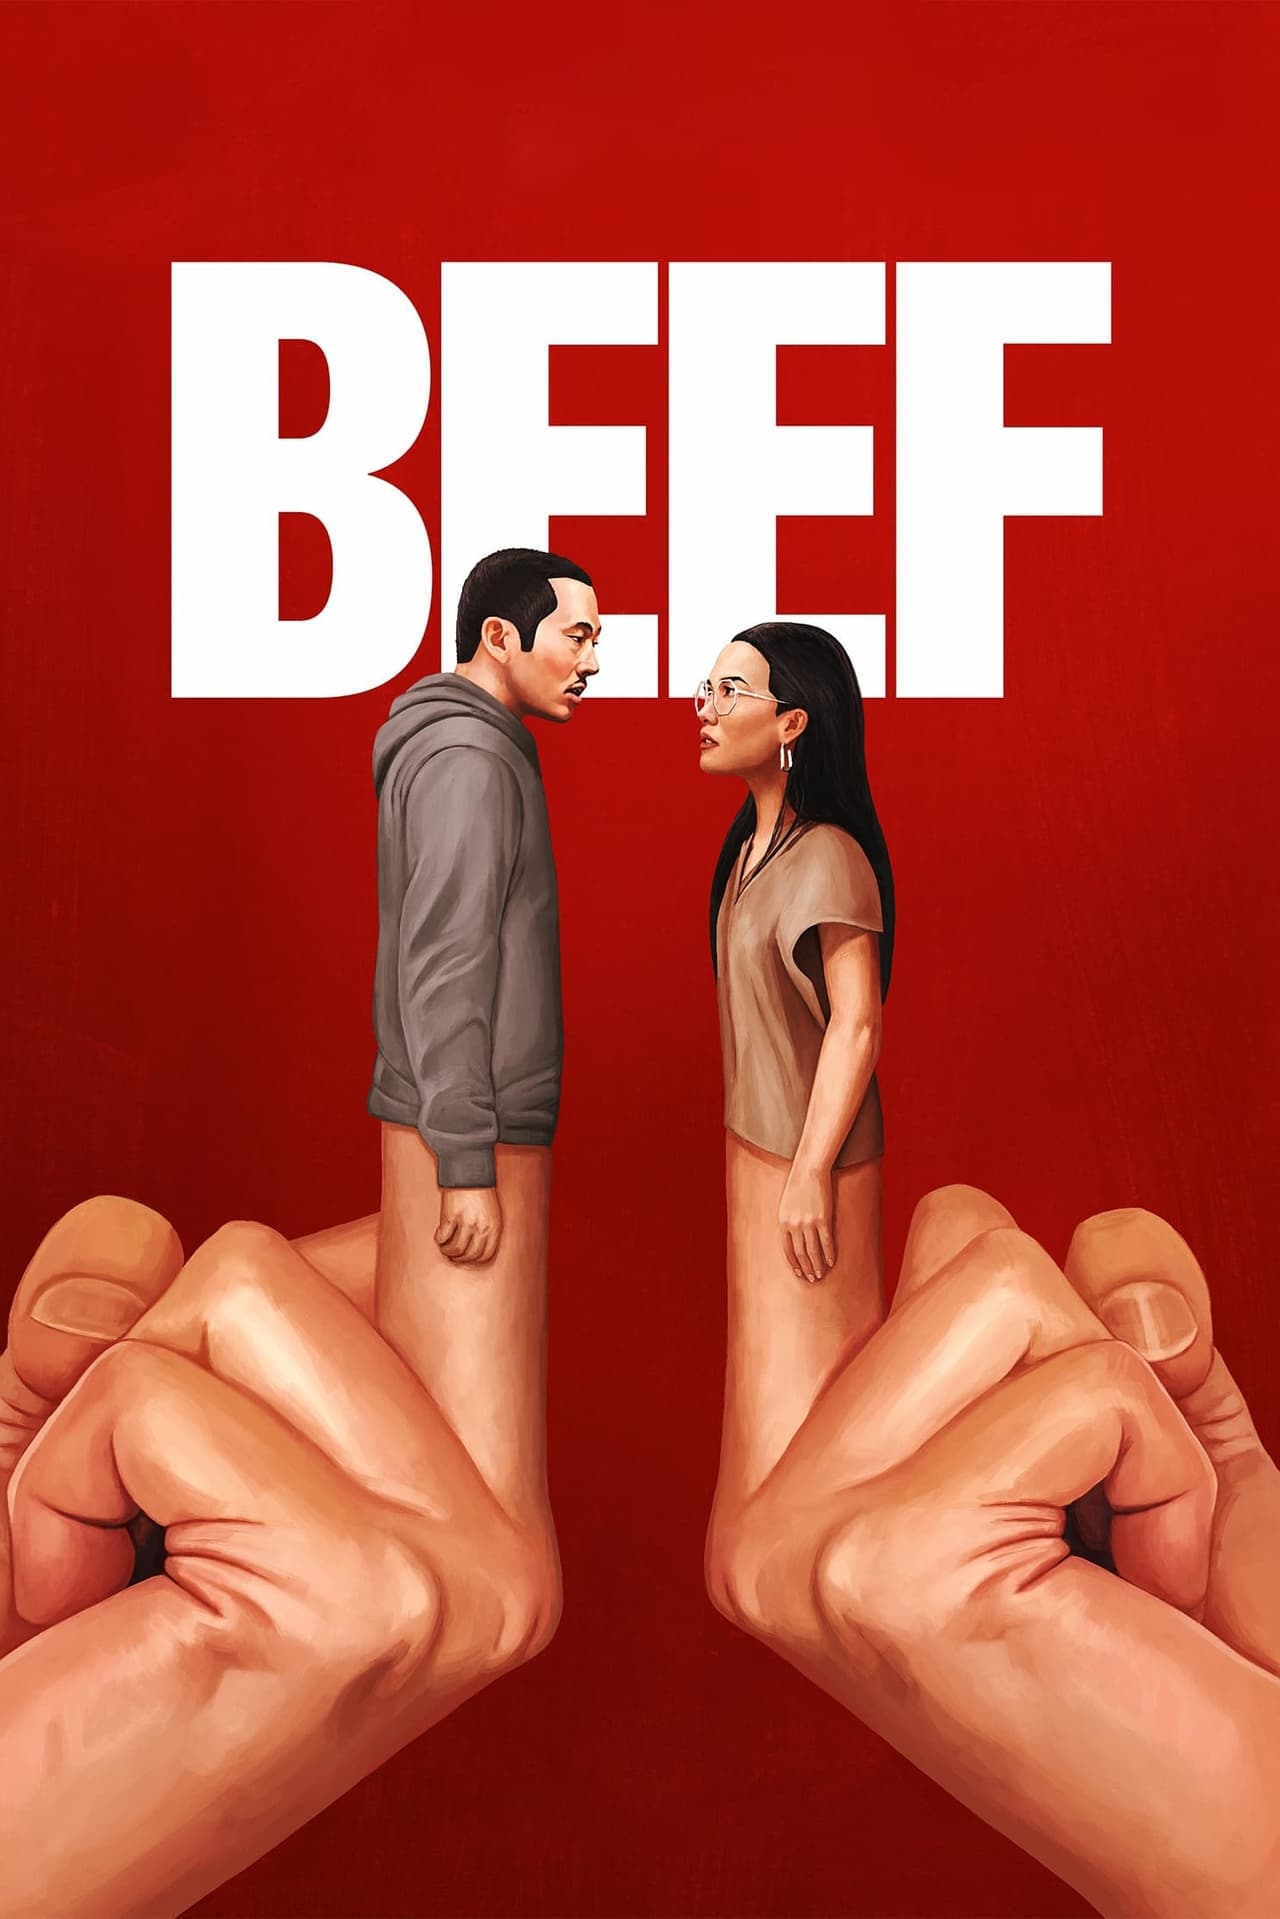 Read more about the article Beef S01 (Complete) | TV Series